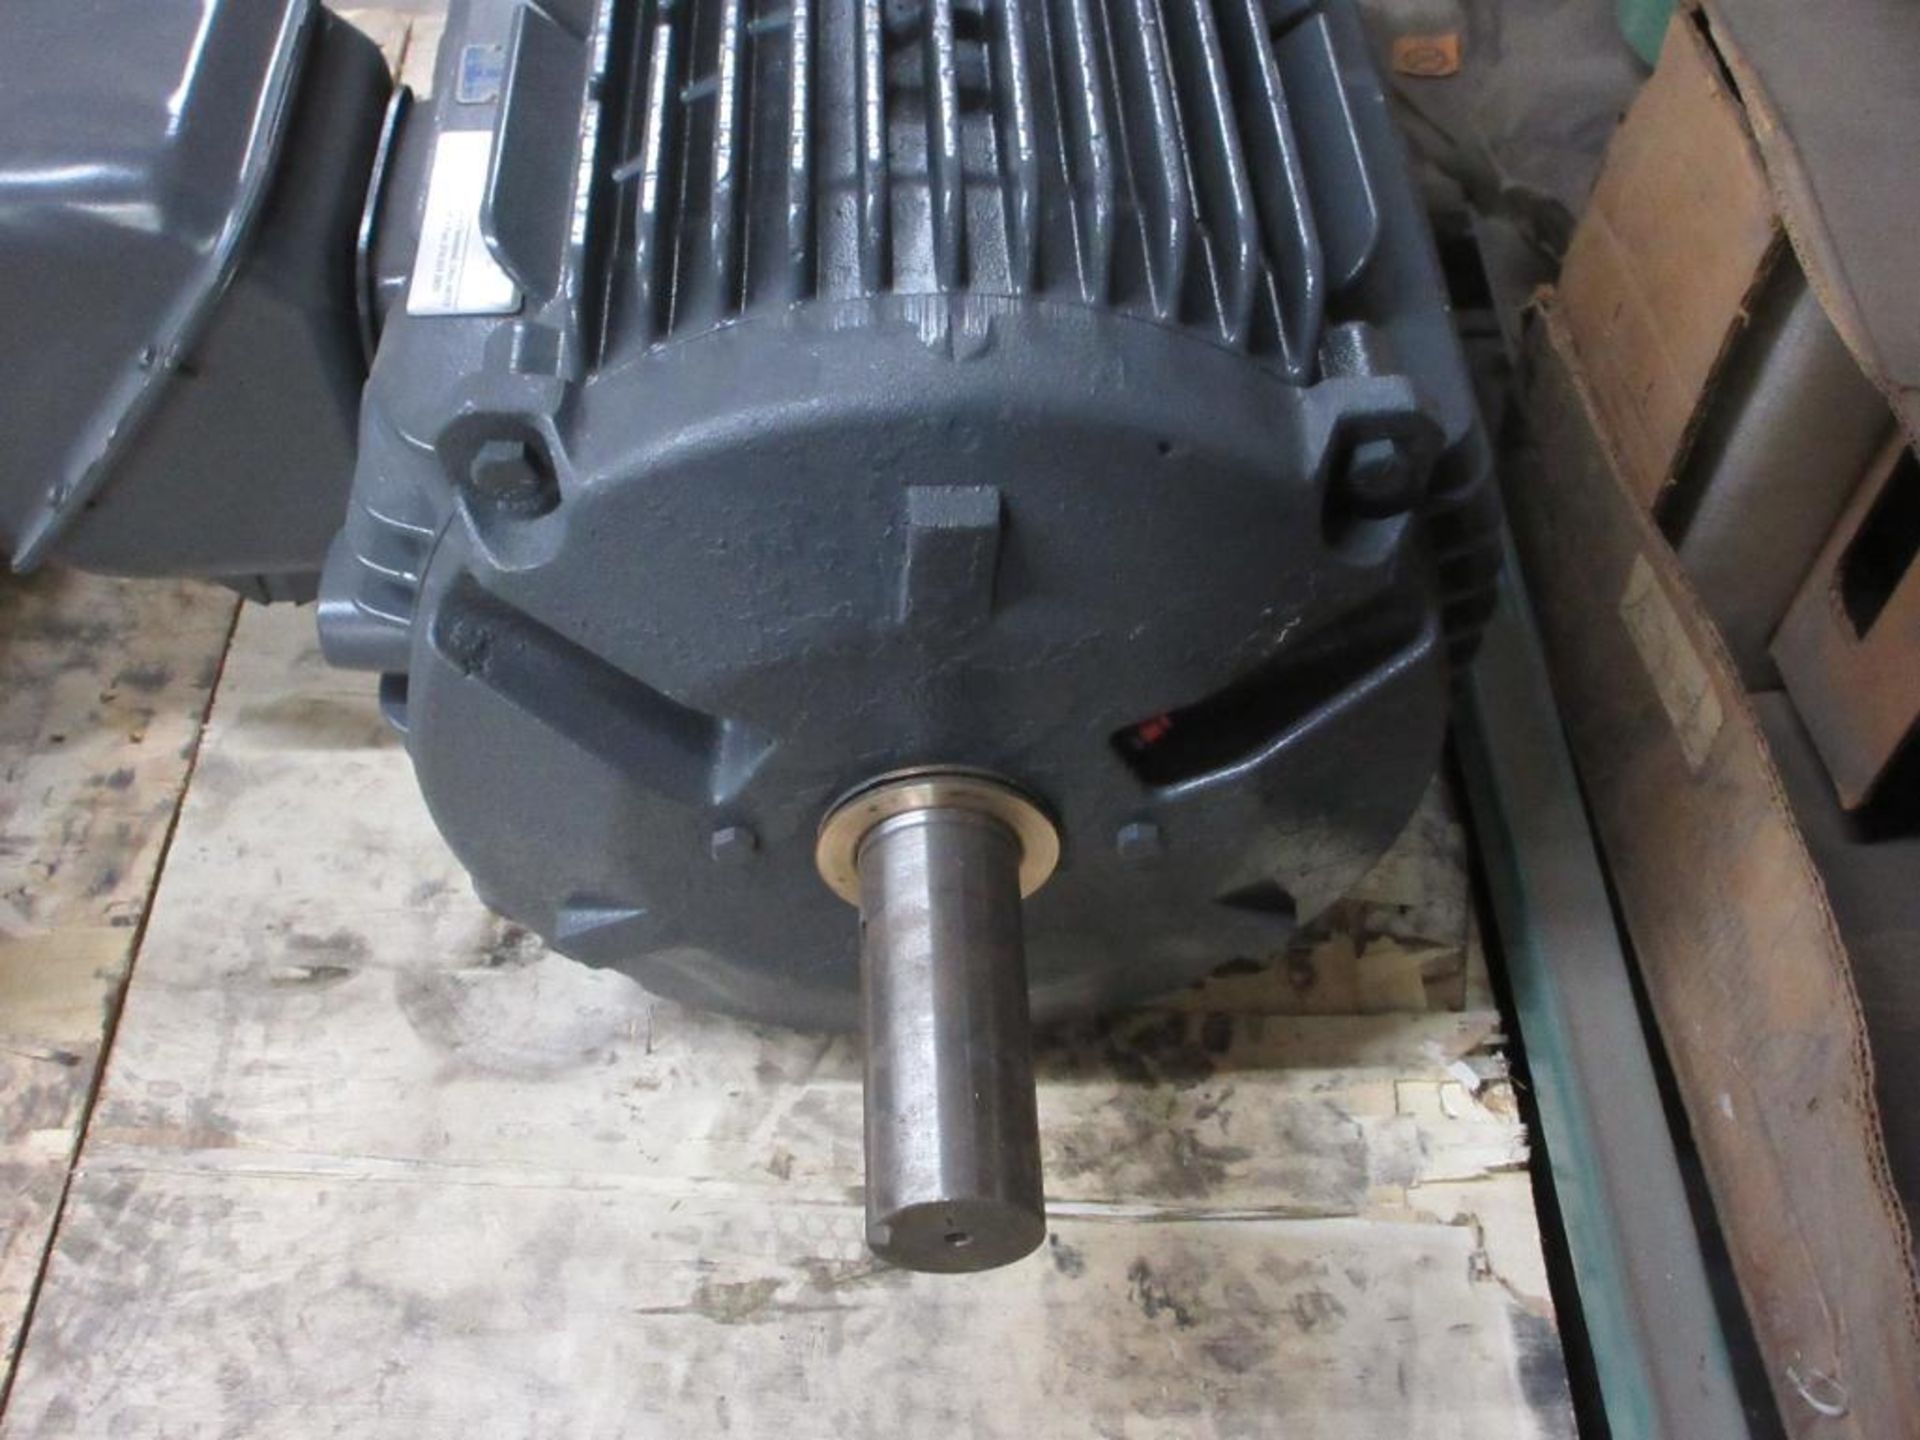 NIDEC MOTOR CORPORATION 14744627-100 25HP 885RPM 3 PHASE ELECTRIC MOTOR (THIS LOT IS FOB CAMARILLO C - Image 4 of 7